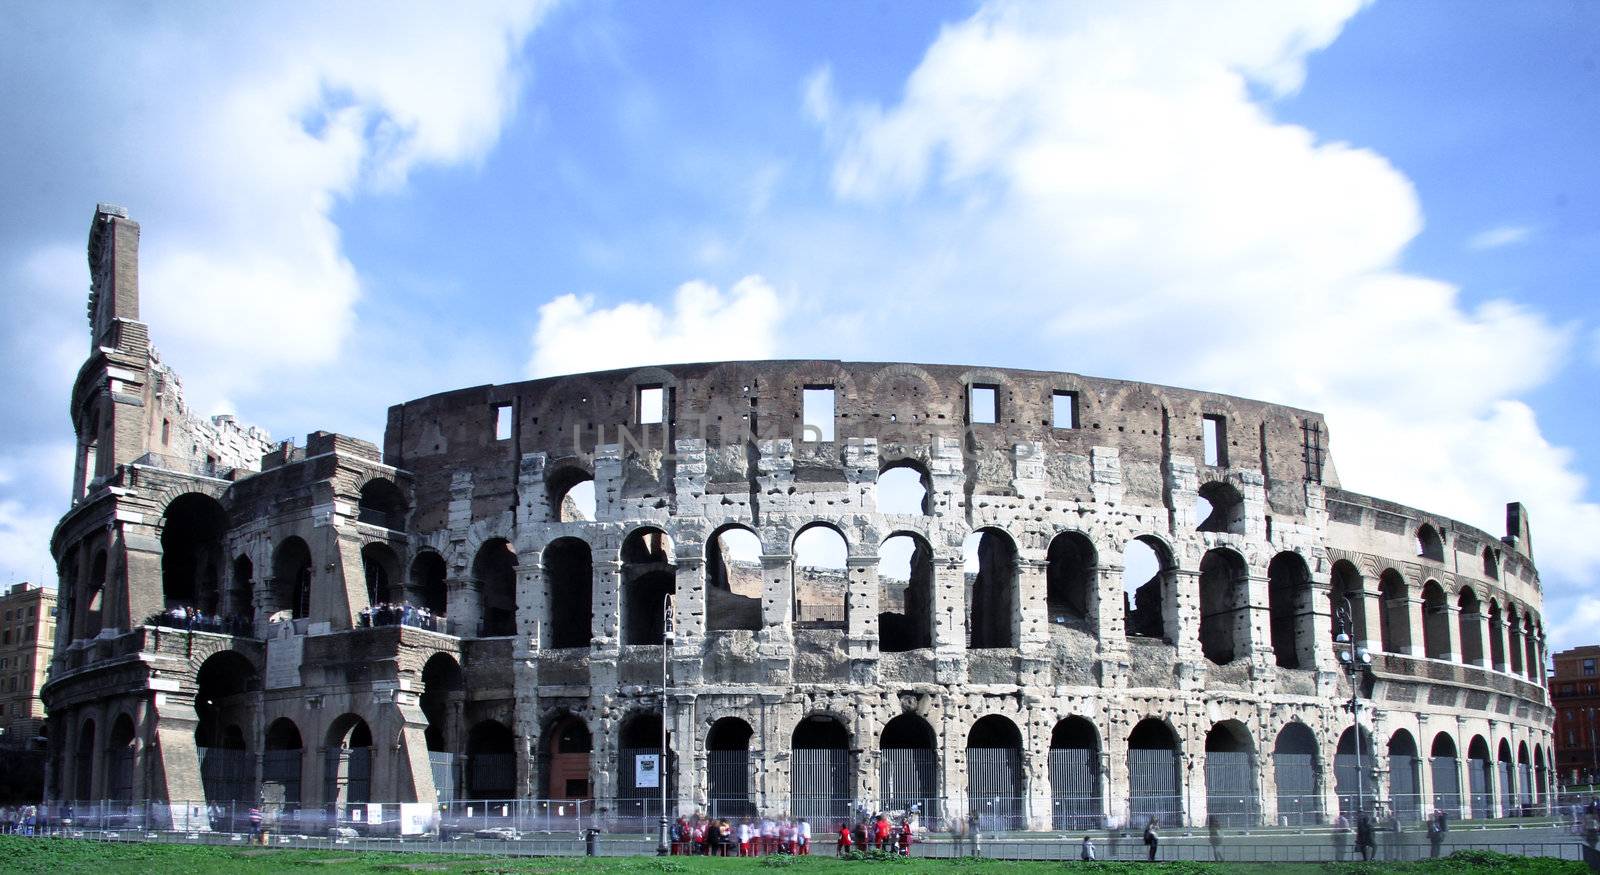 the famous and ancient coliseum in rome